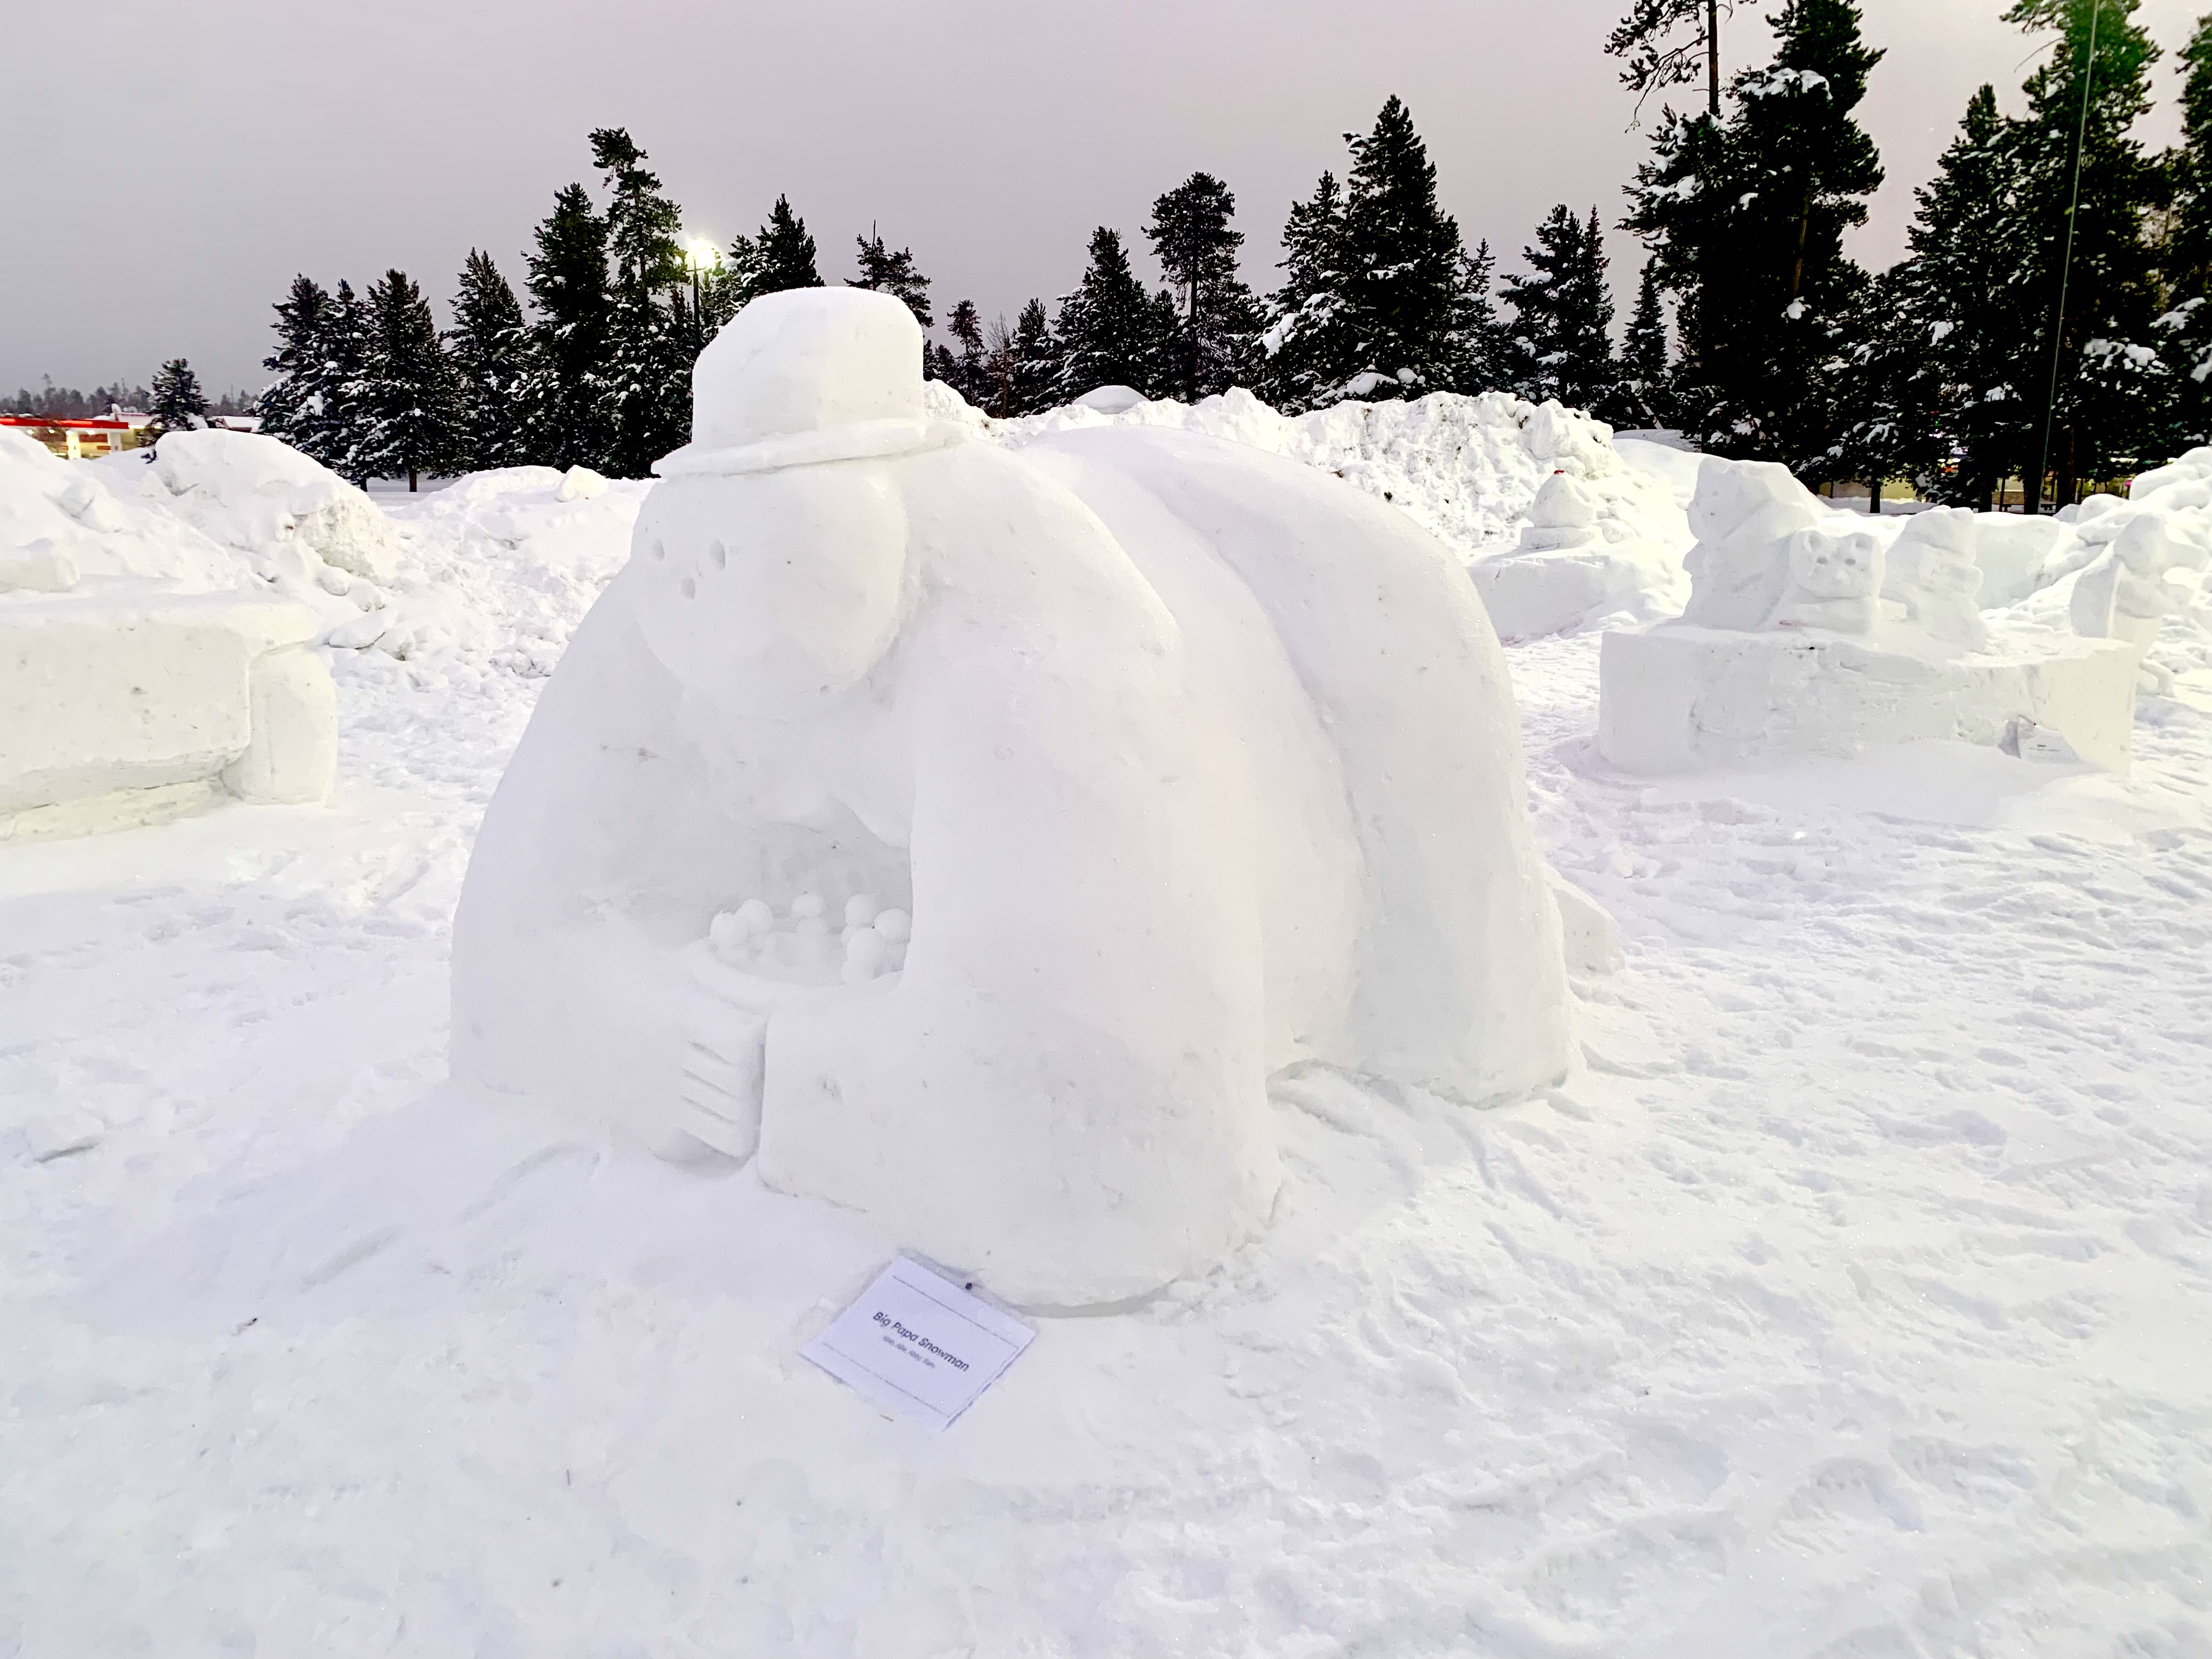 Snow sculptures in the park